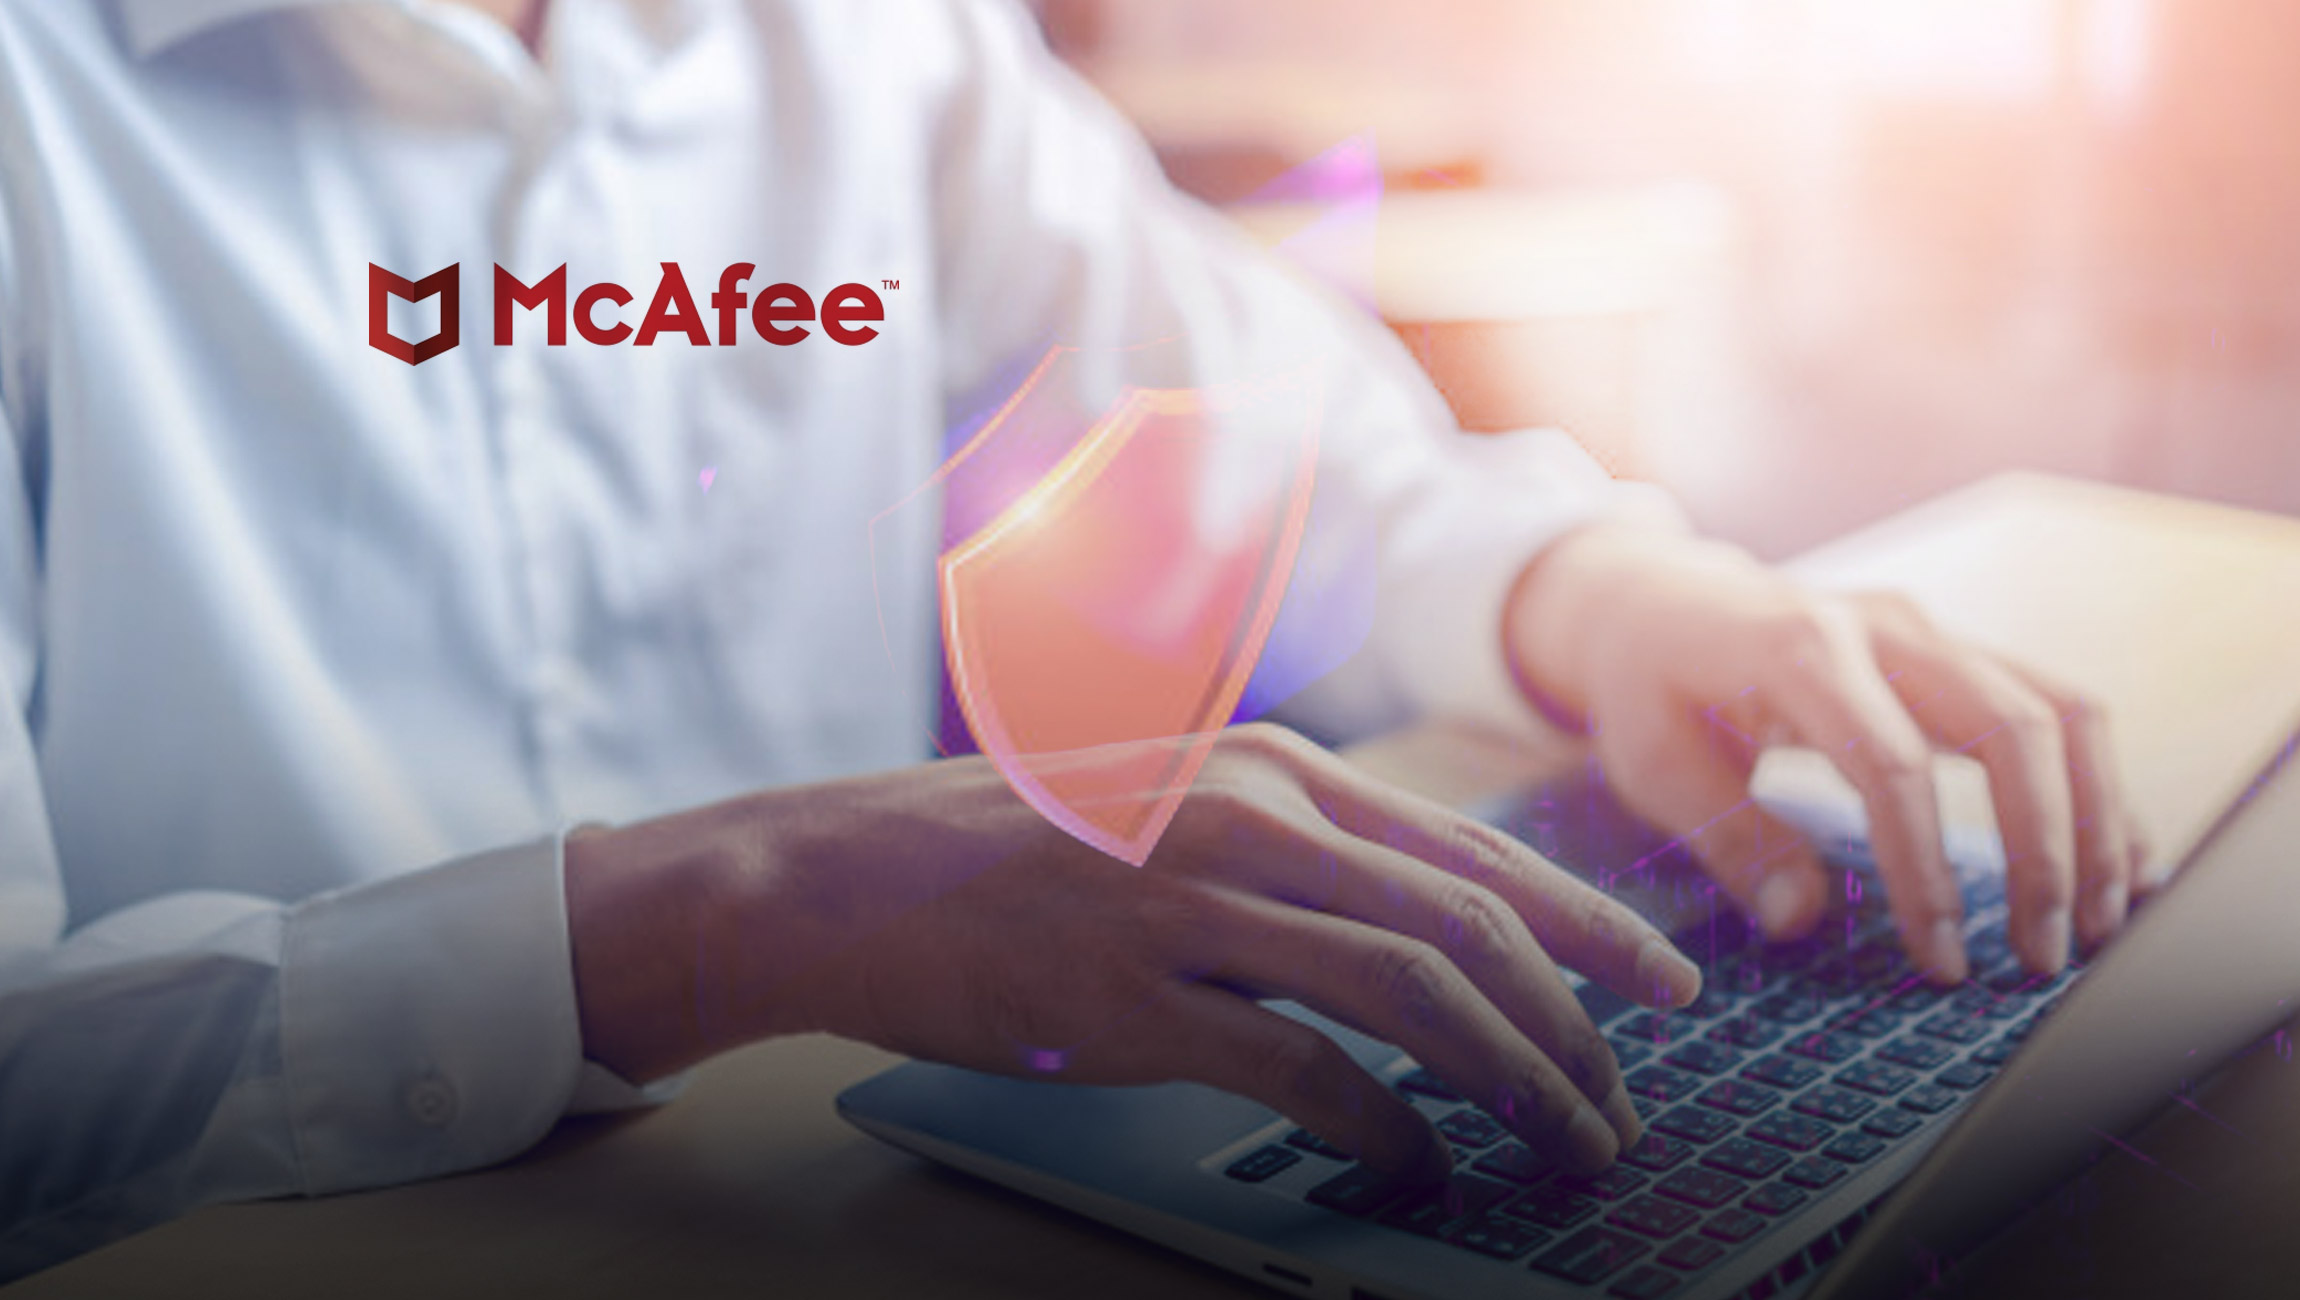 McAfee Finds Increase in Online Holiday Shopping Creates the Perfect Storm for Cyber Crime